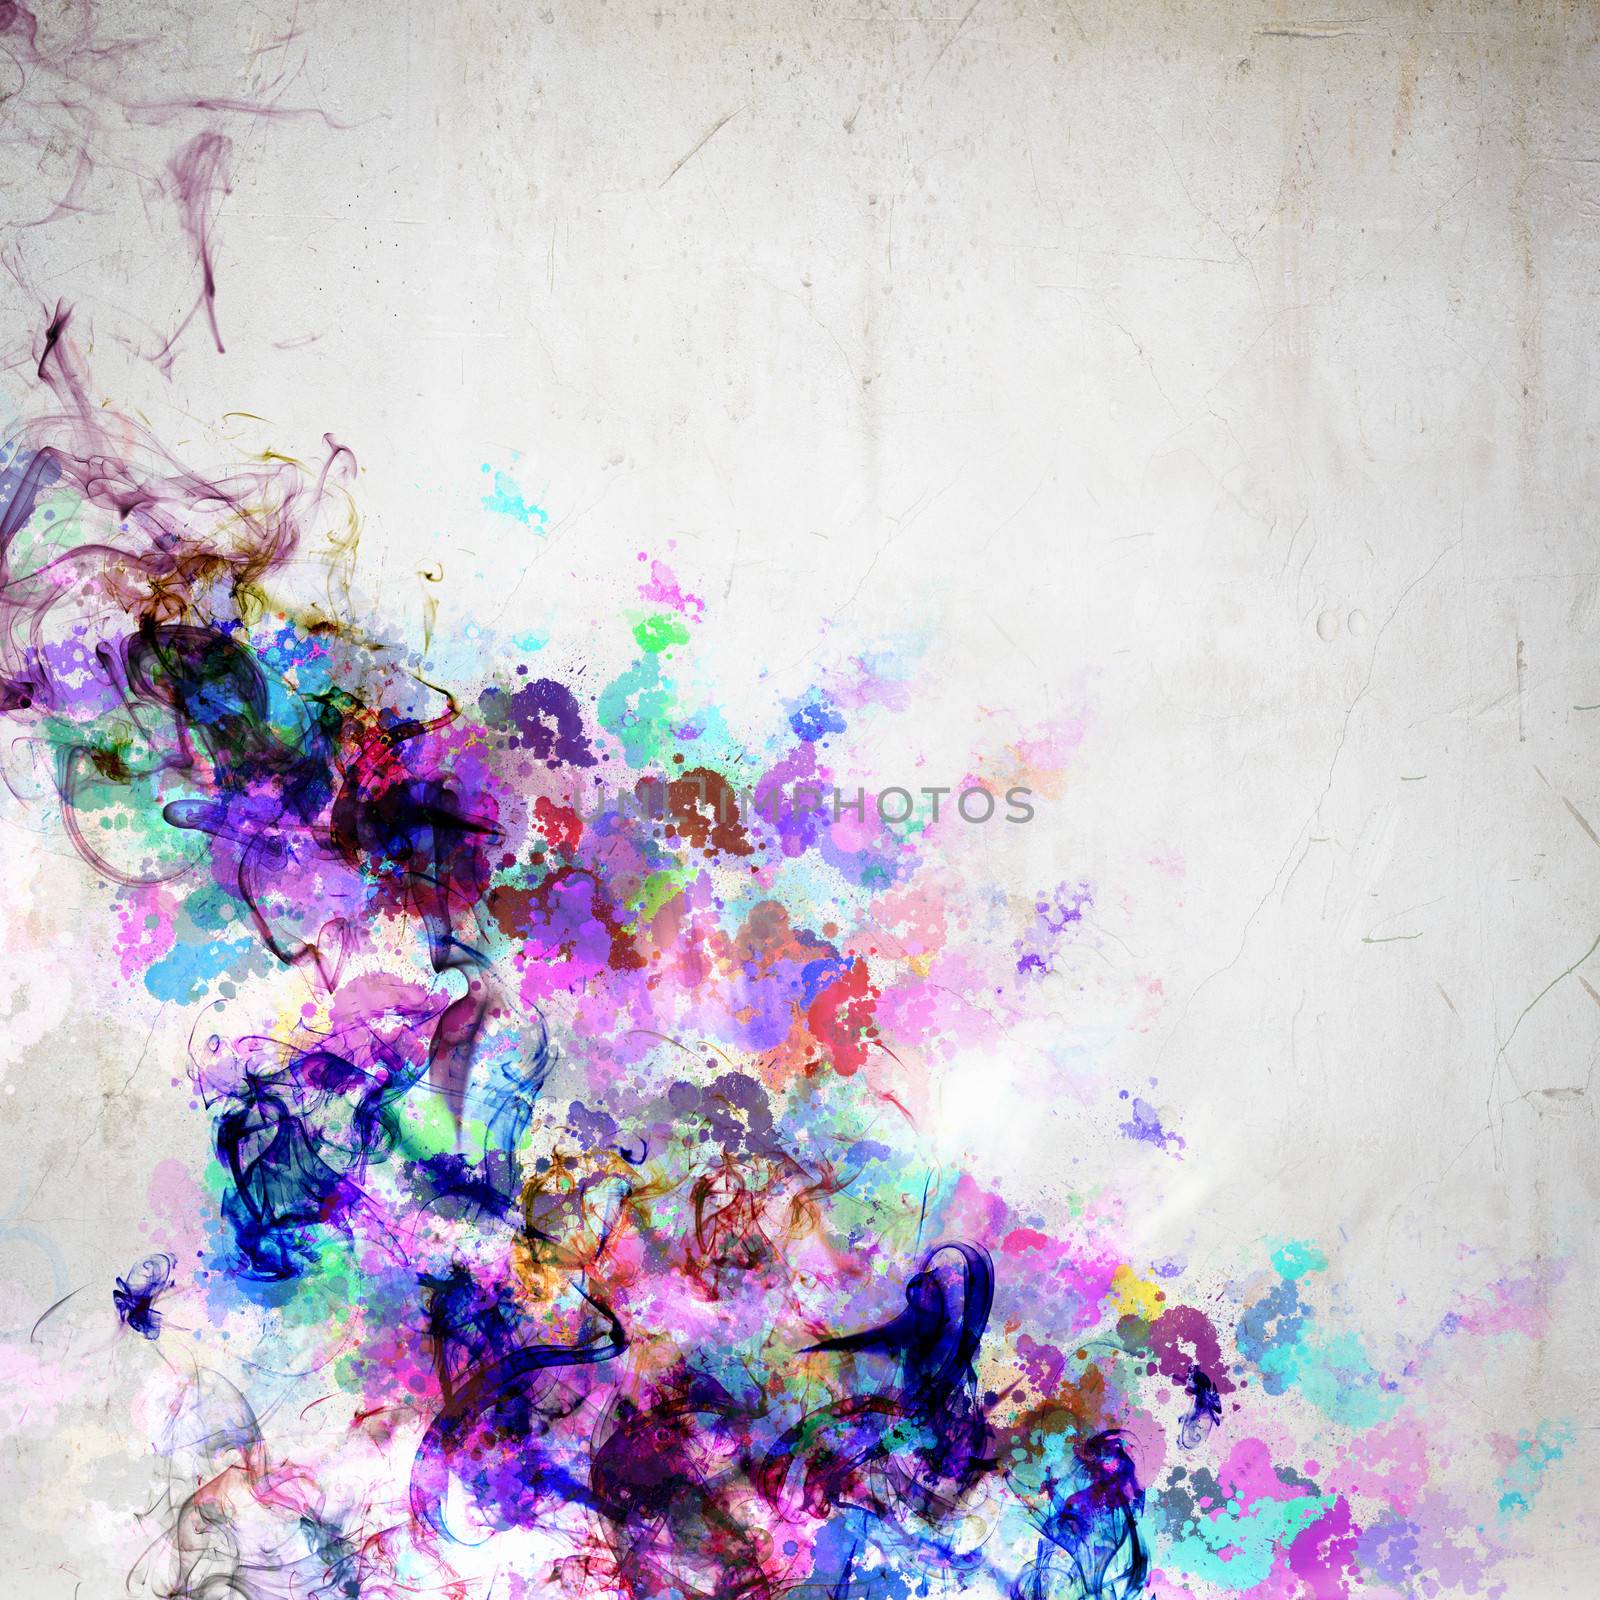 Background image with color fumes and splashes